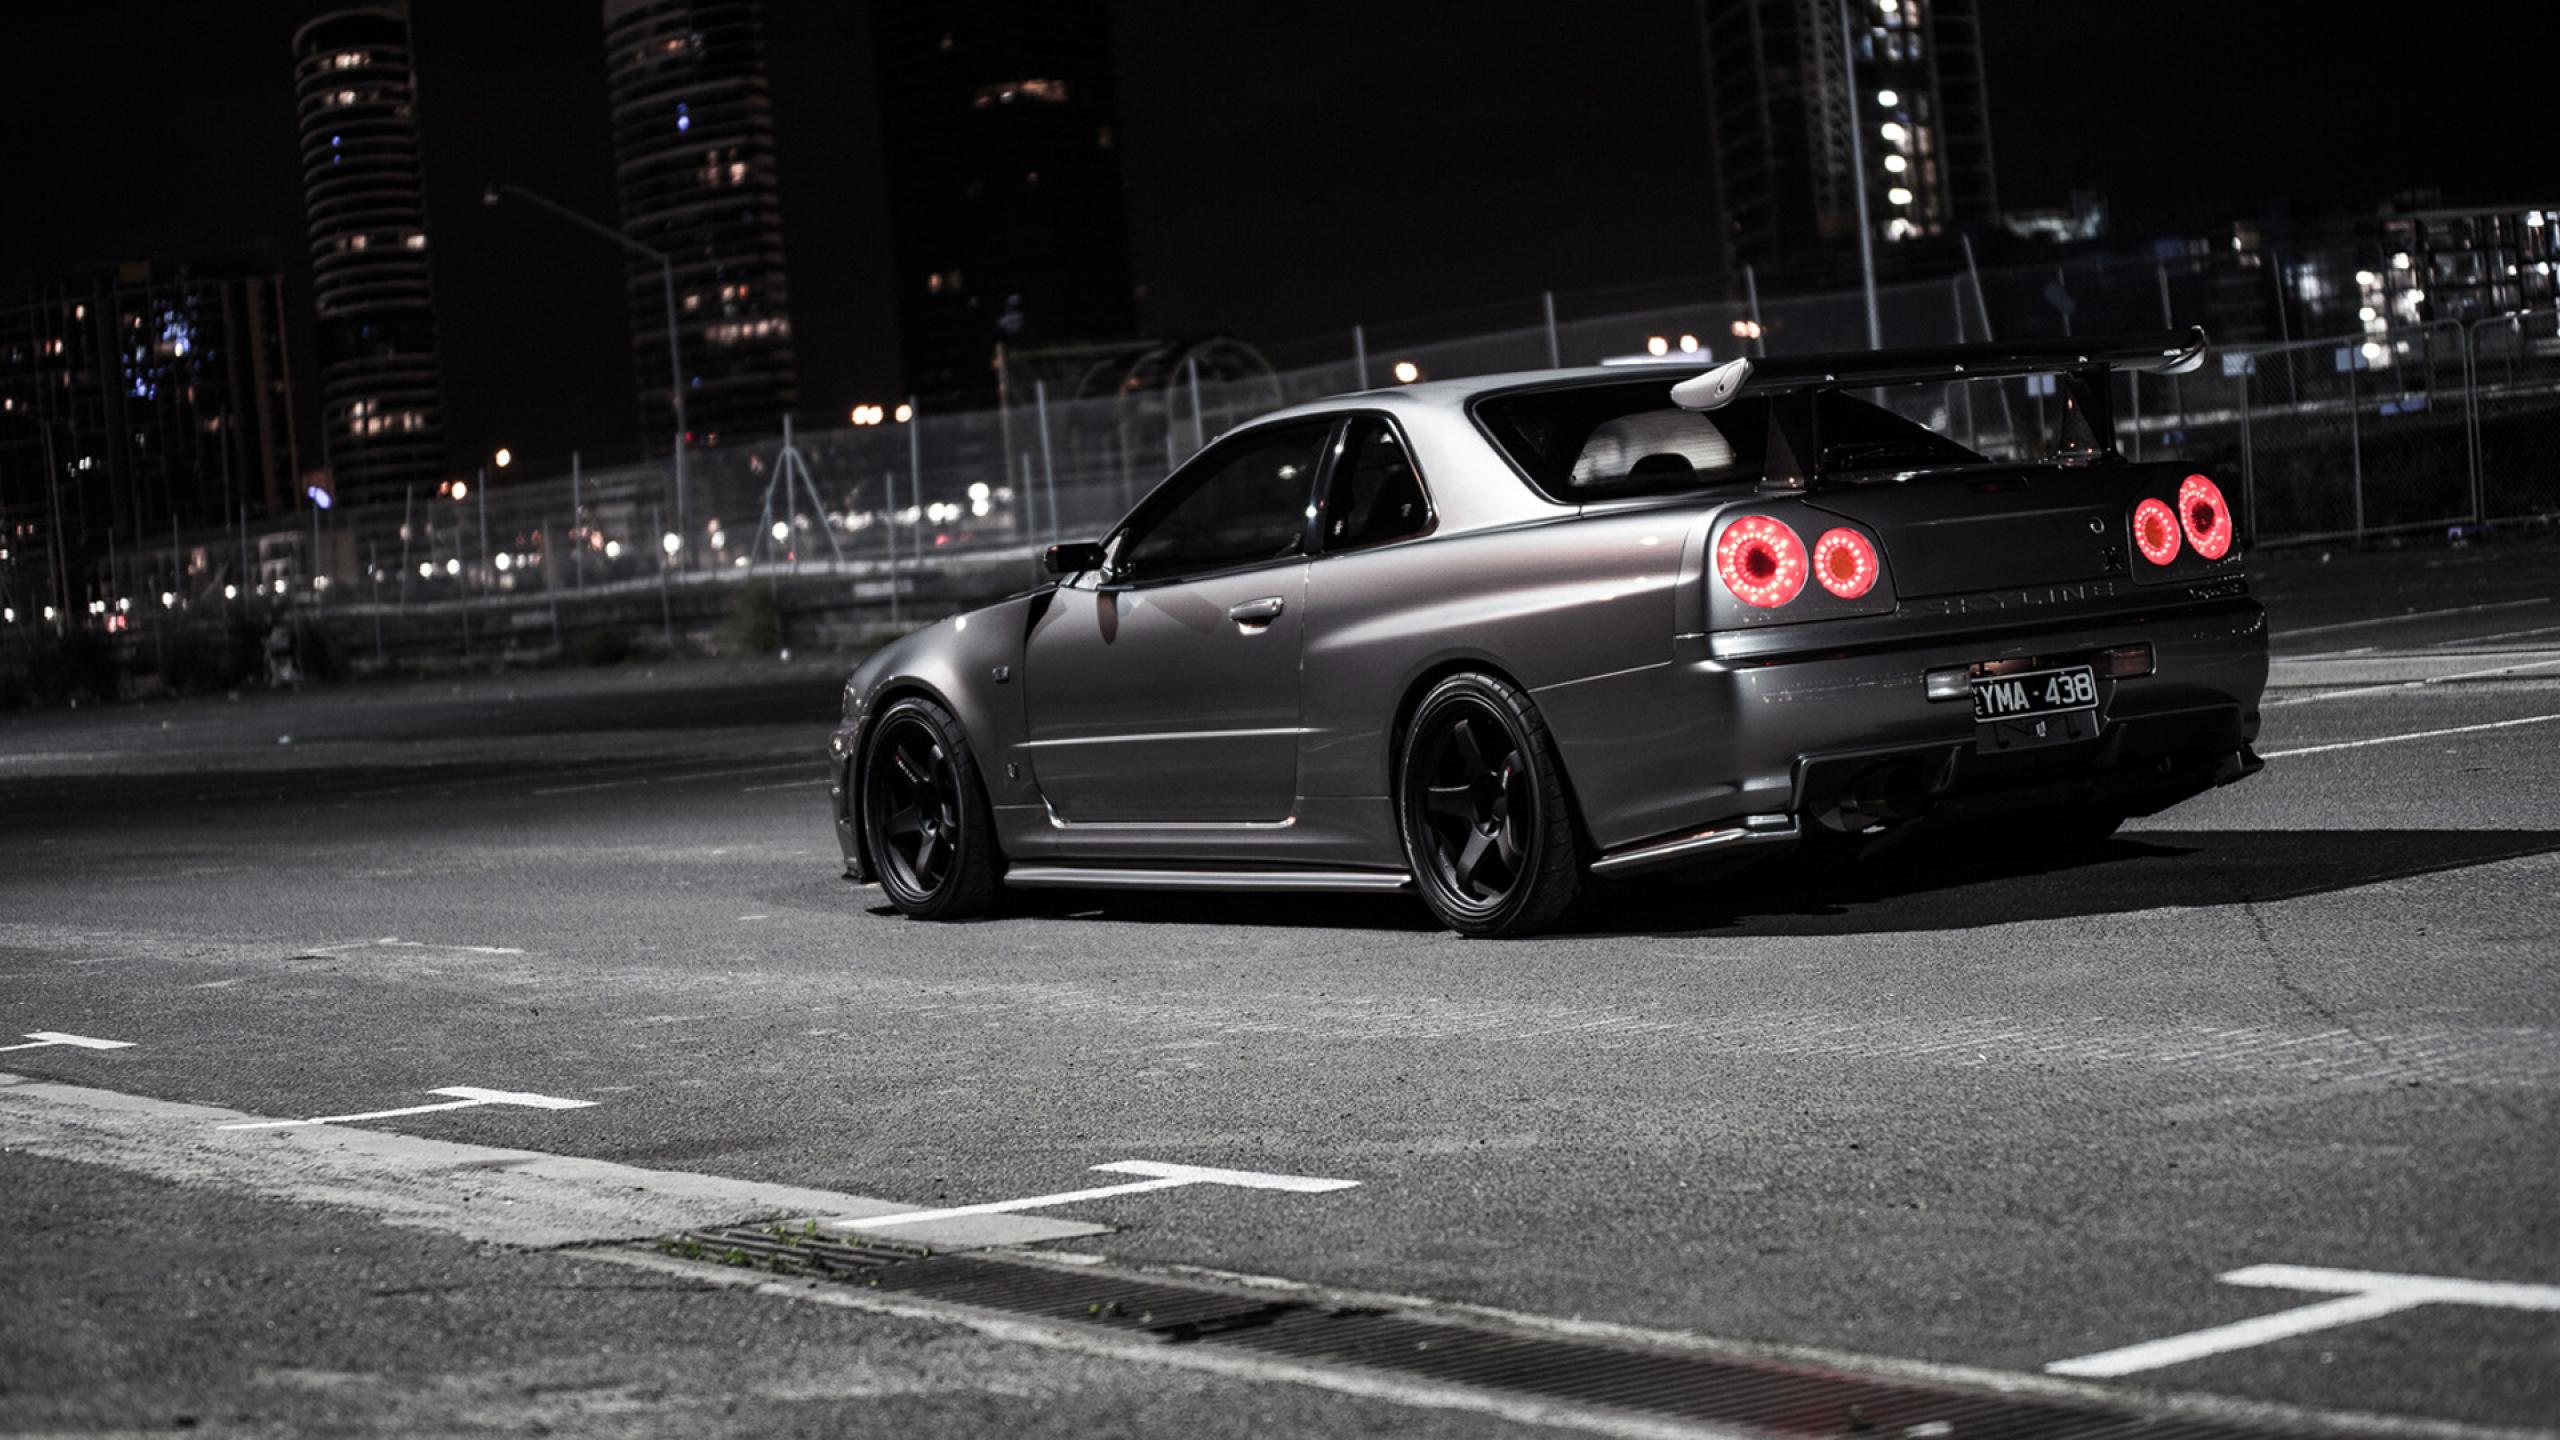 Nissan Gtr Backgrounds Free Download 